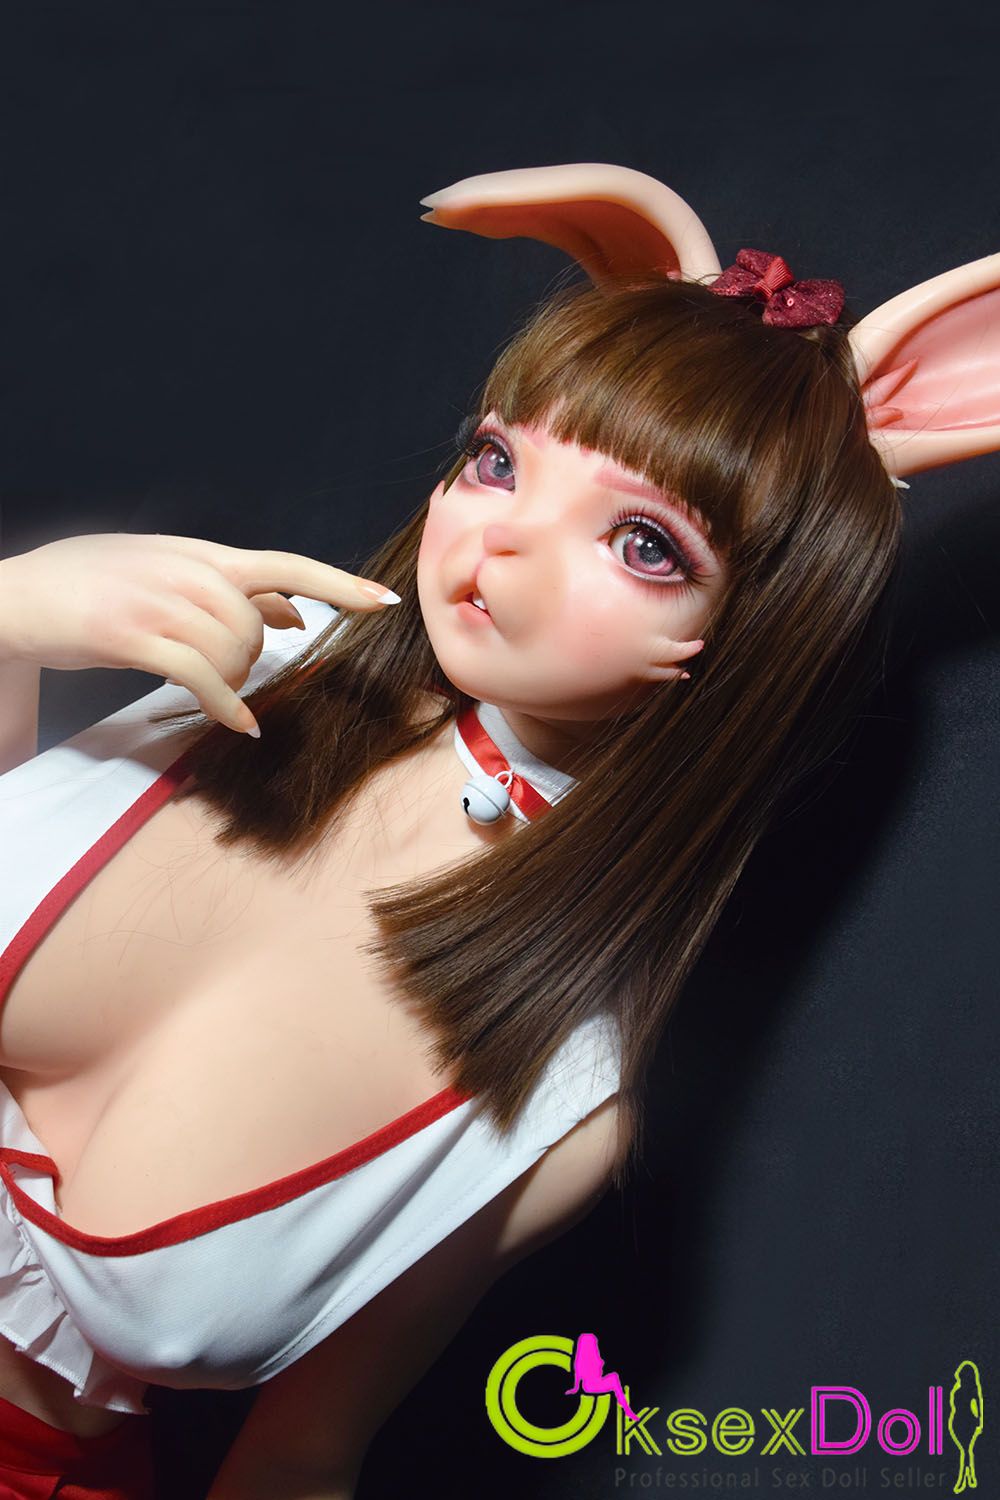 elsababe-doll.html B-cup Real Dolls Pictures